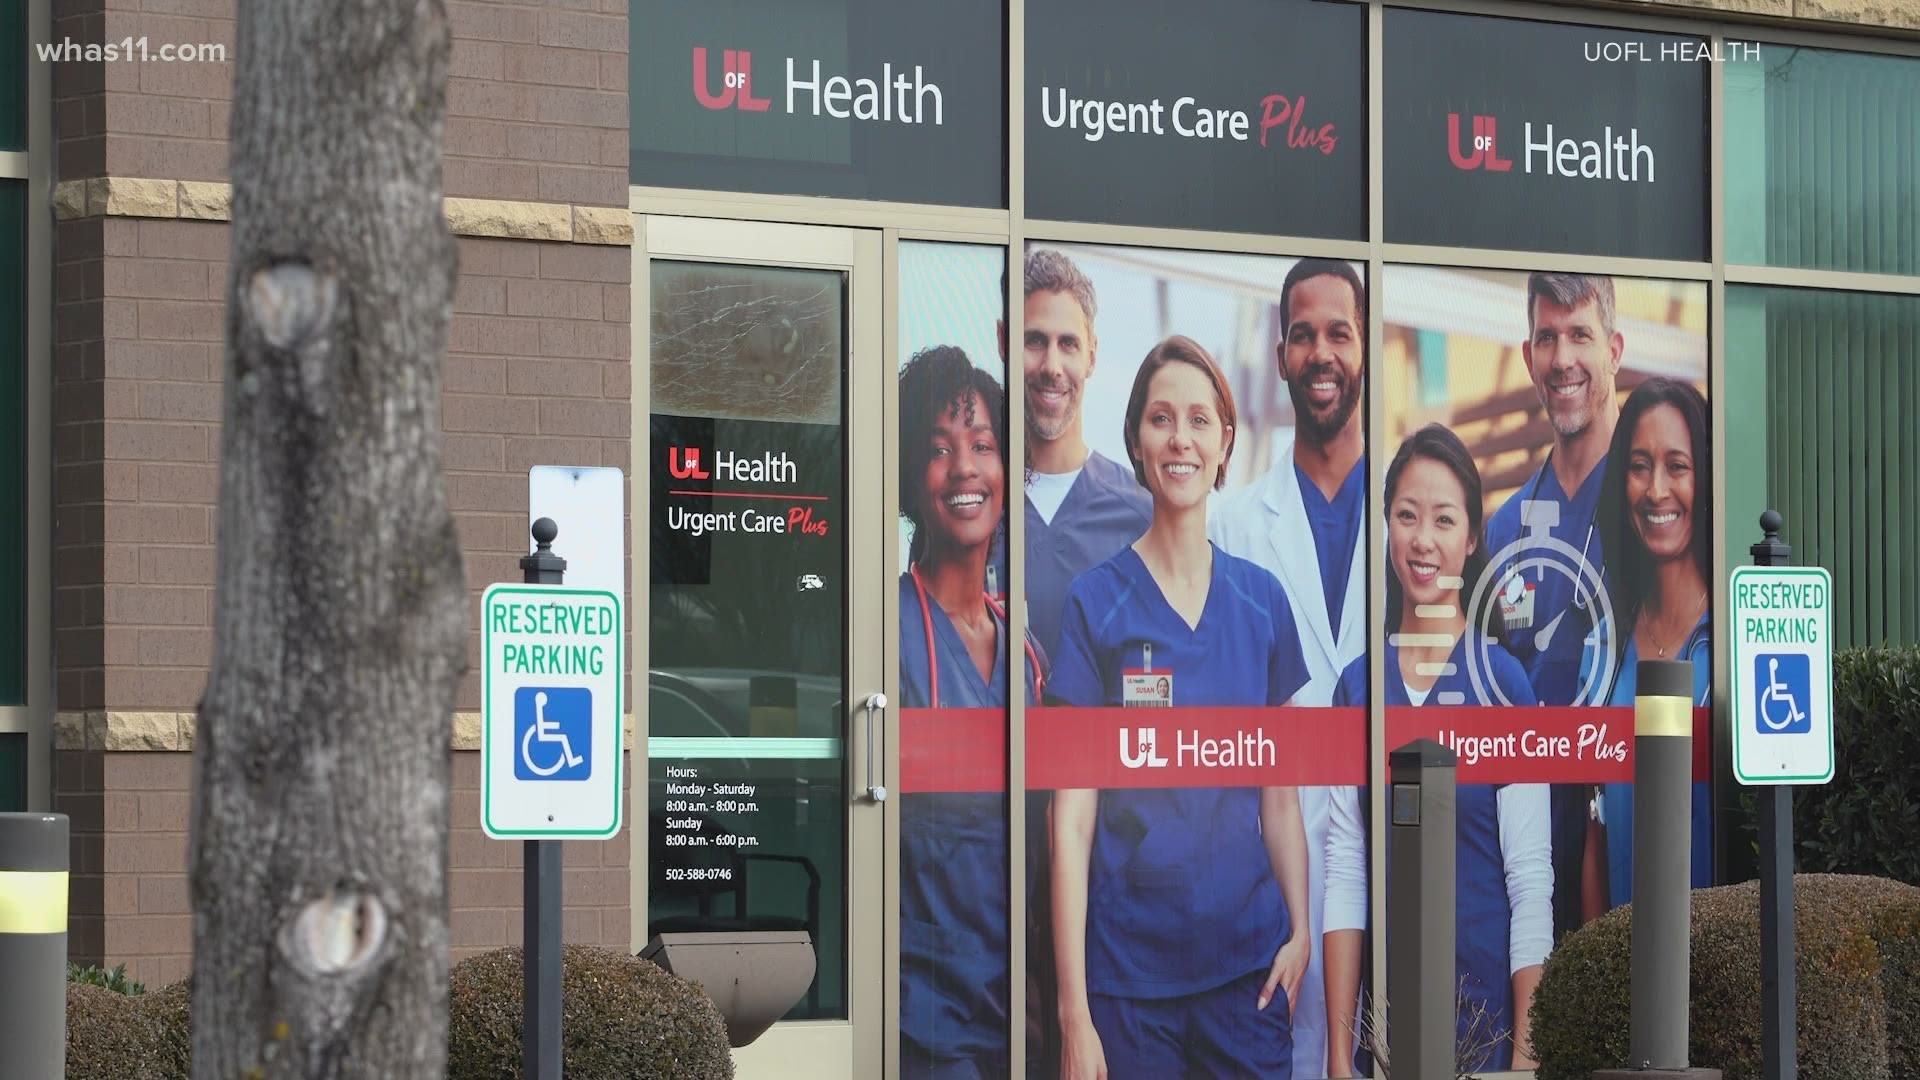 UofL Physicians - Urgent Care Plus will offer more after hours care and primary care than typical urgent care facilities